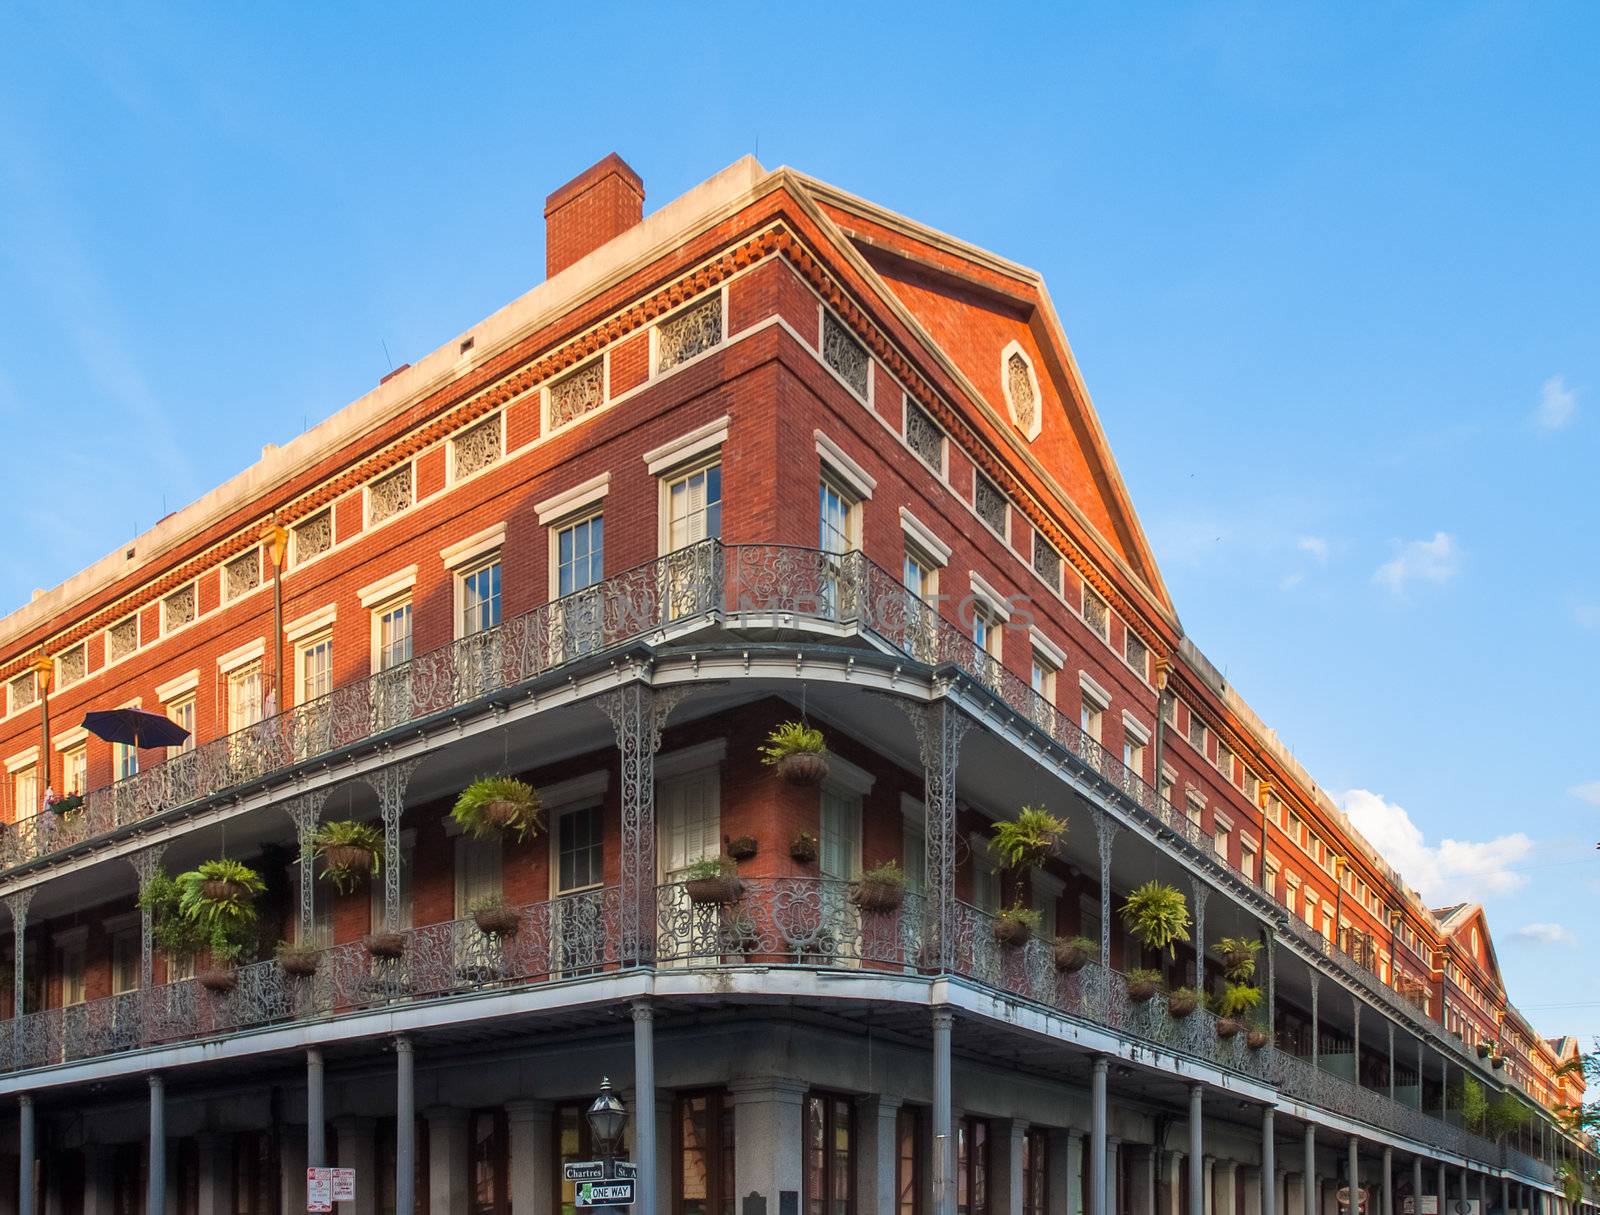 Brick Building in French Quarter by edan